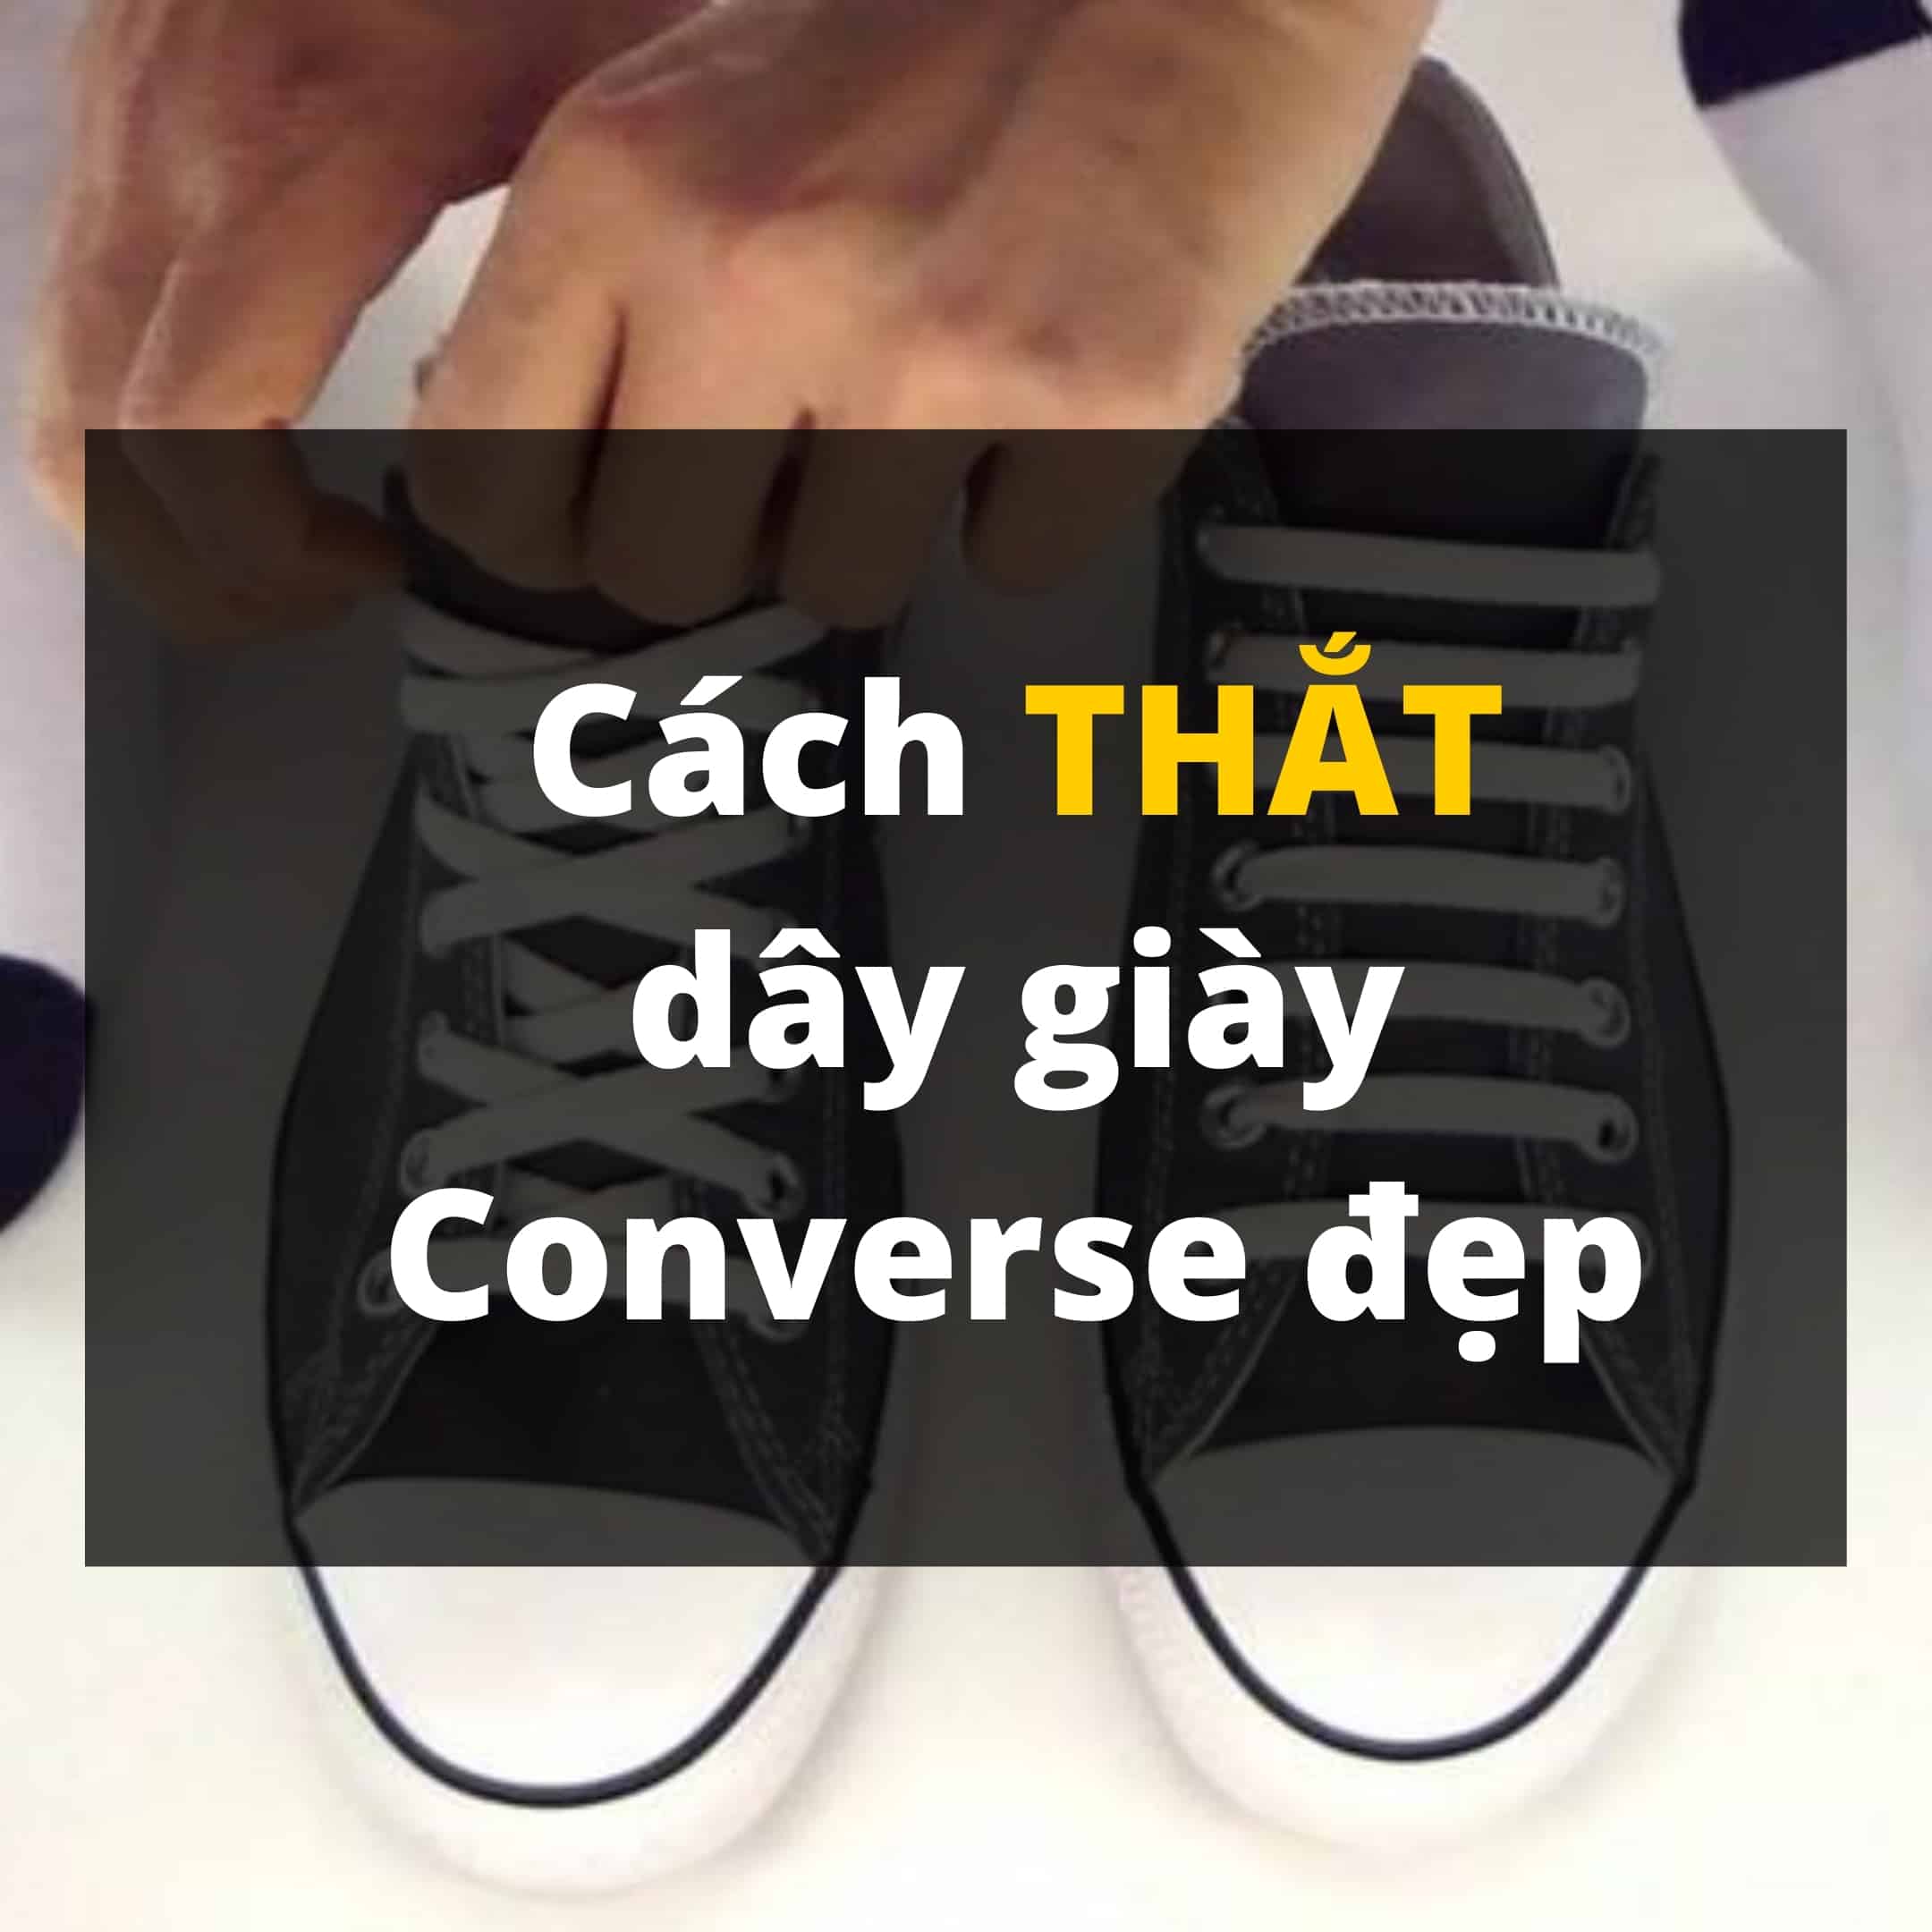 CACH THAT DAY GIAY CONVERSE DEP